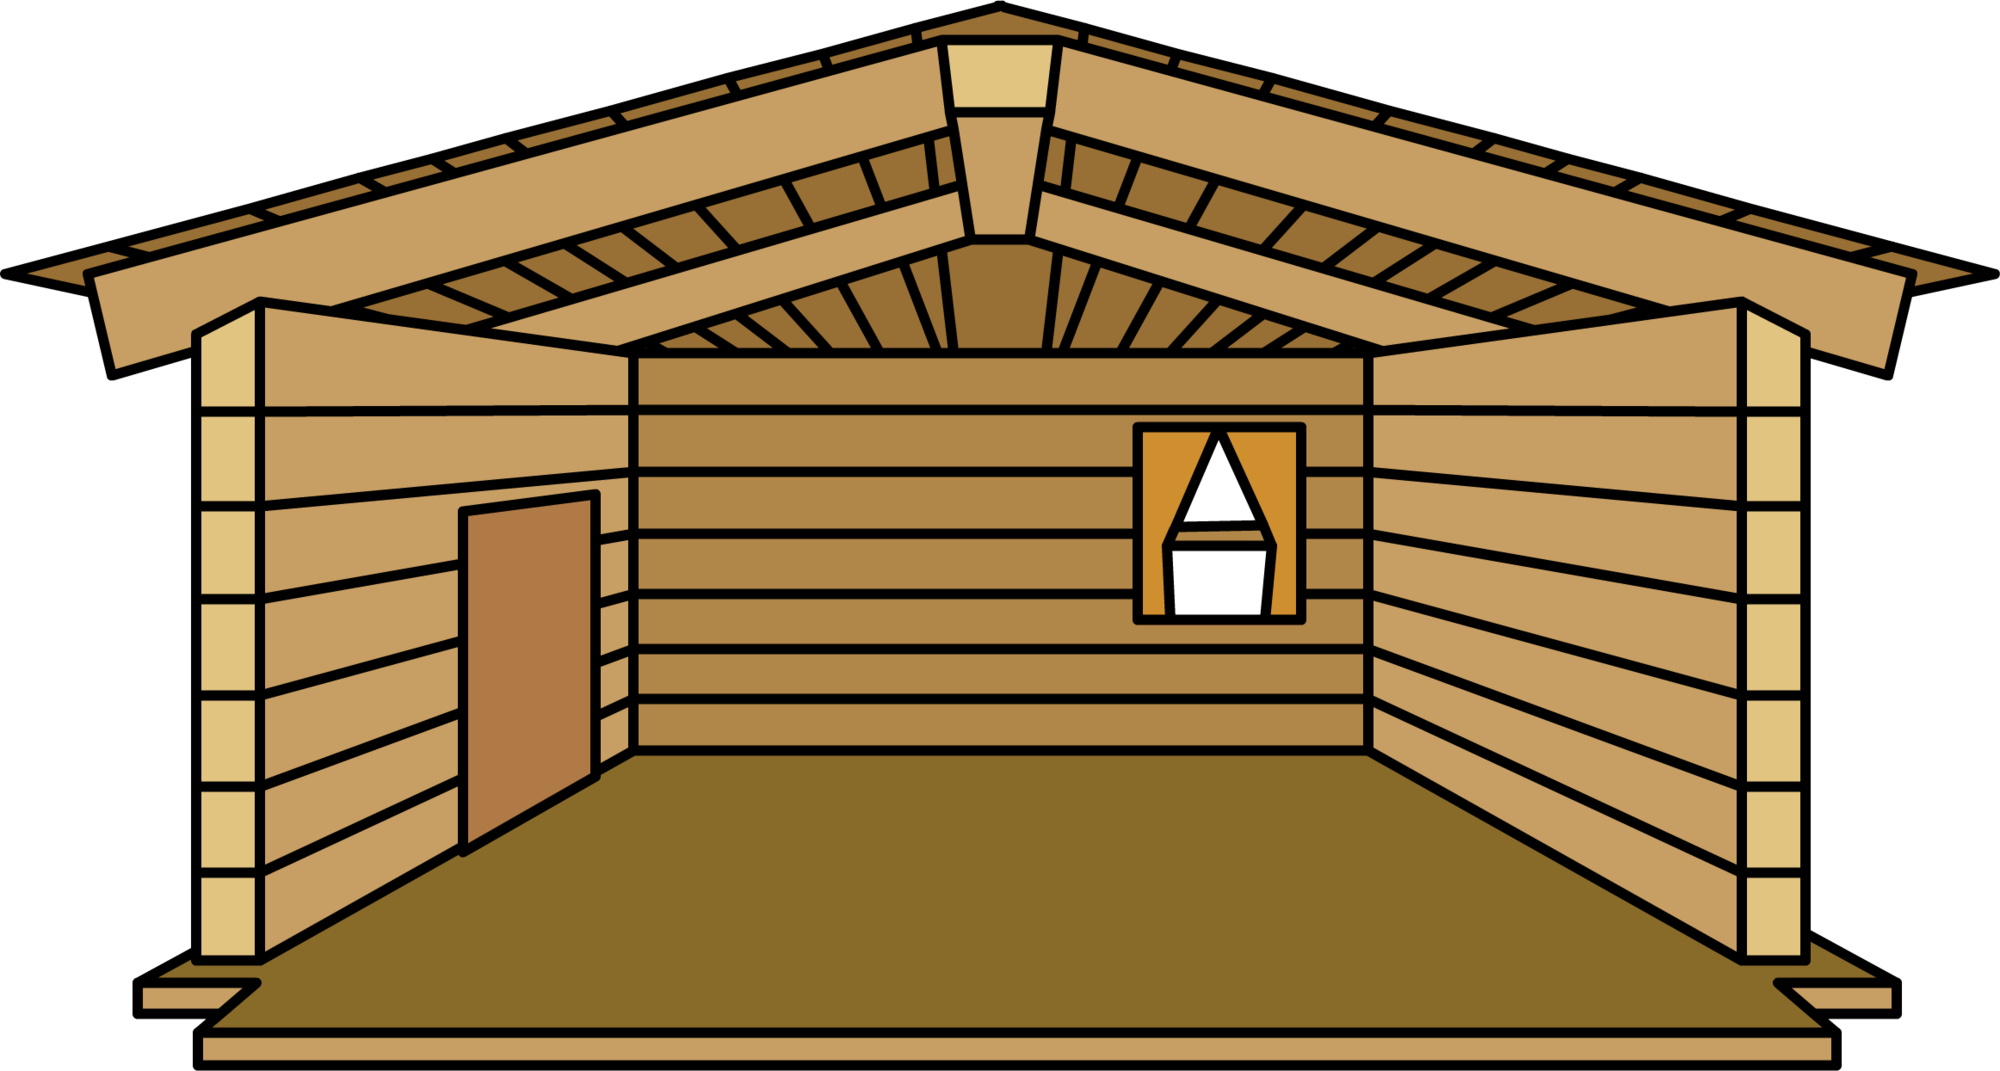 A Drawing Of A Wooden Room